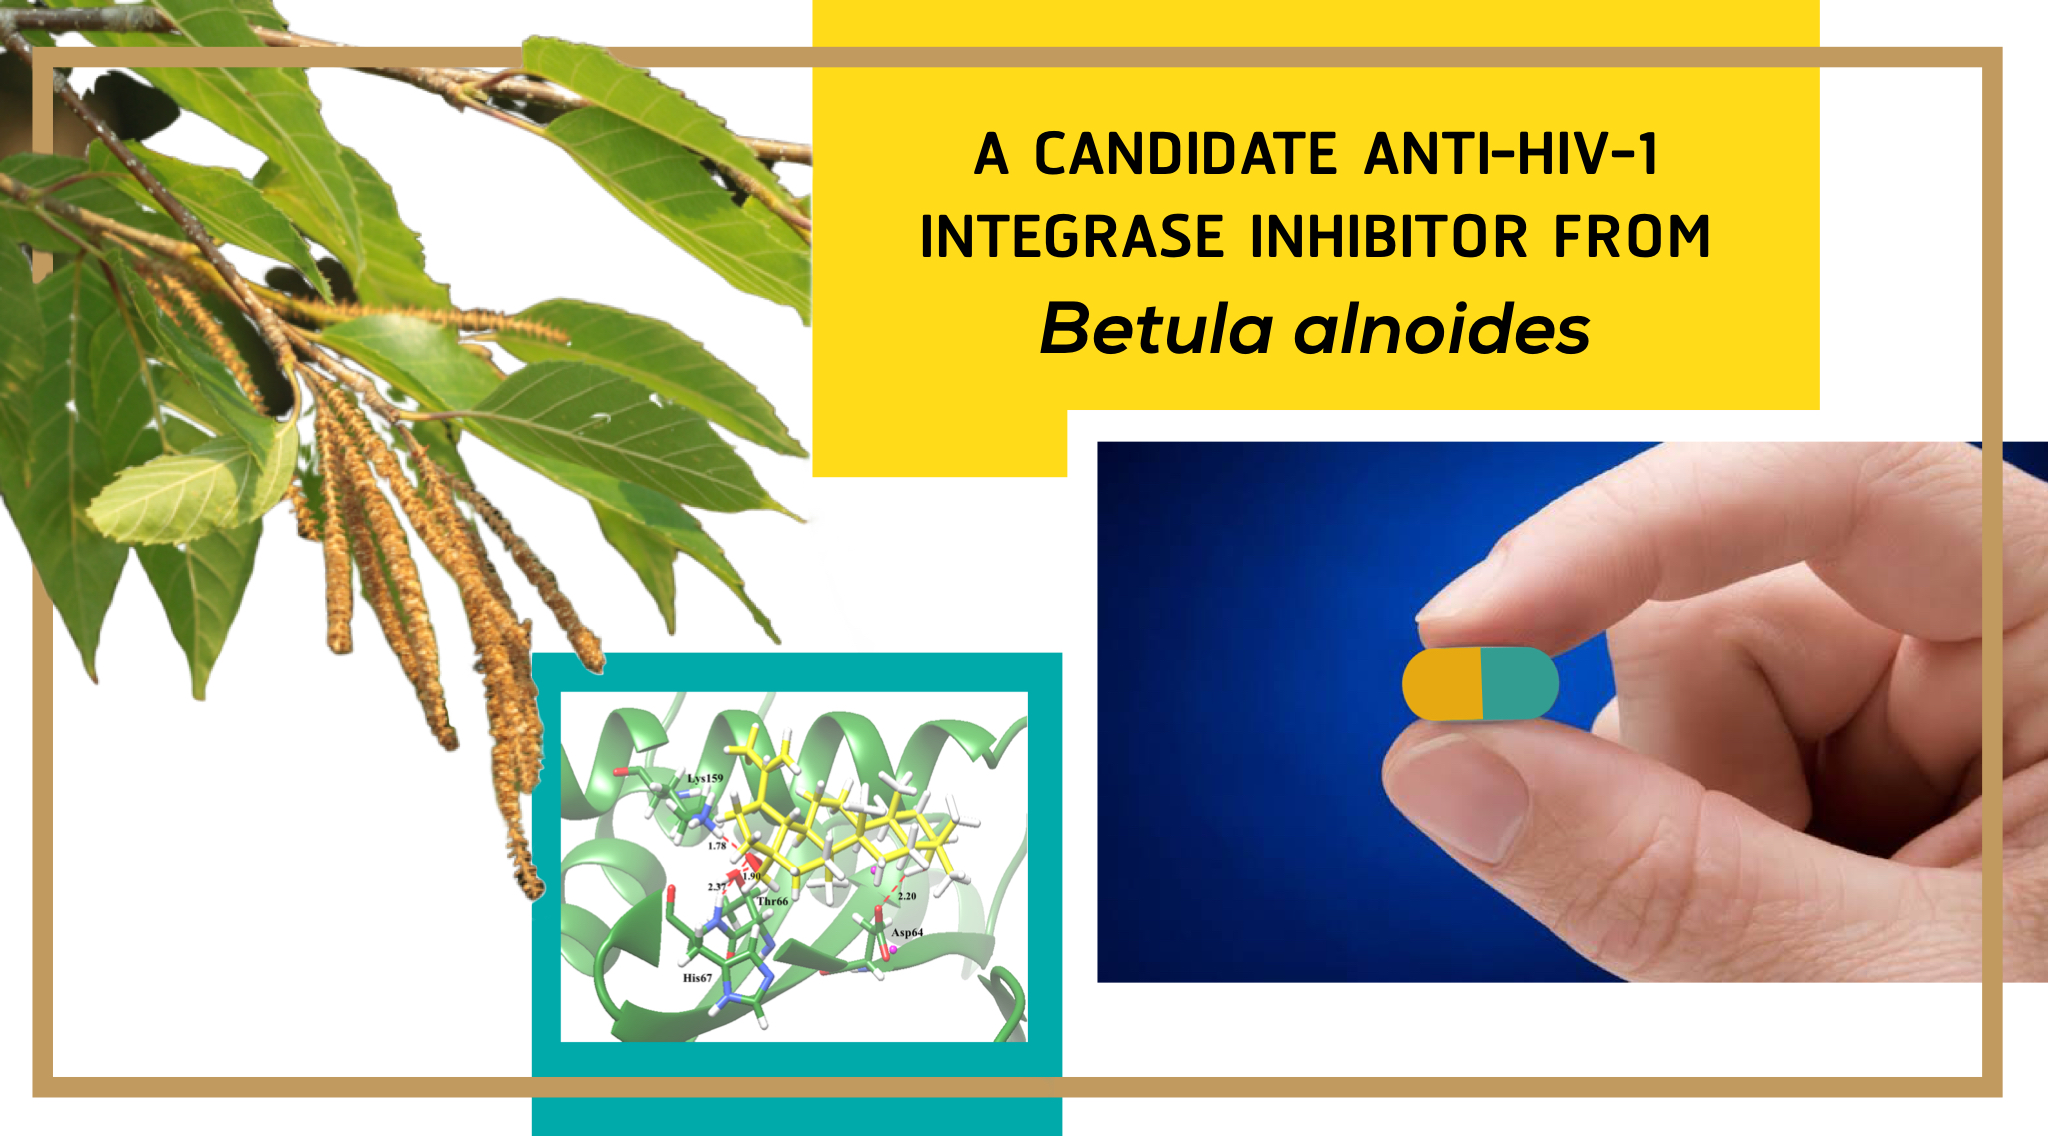 A Candidate Anti-HIV-1 Integrase Inhibitor from Betula alnoides